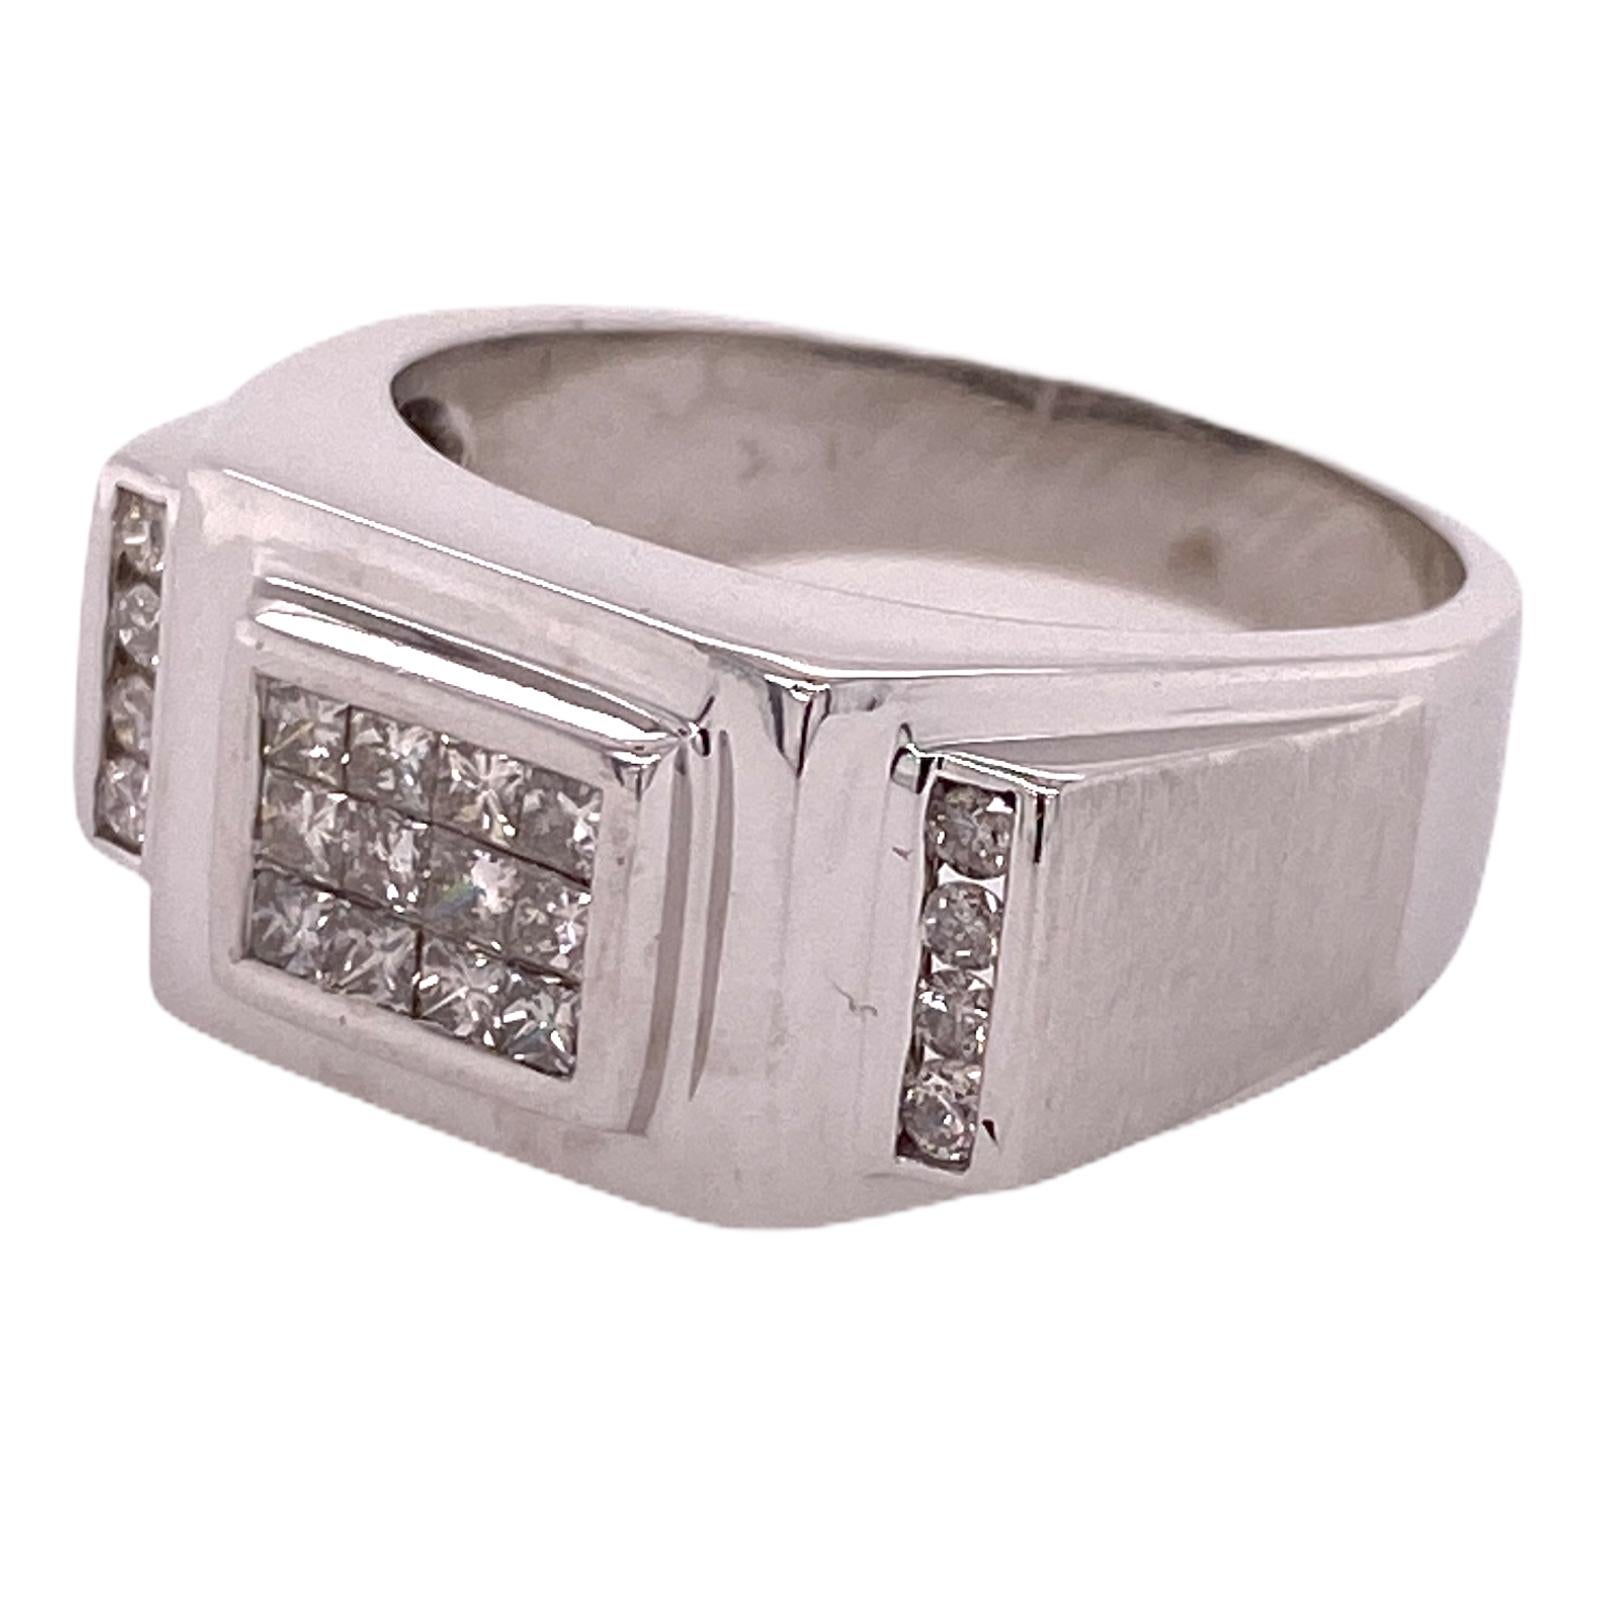 Men's diamond ring fashioned in 14 karat white gold. The ring features 12 princess cut invisibly set diamonds weighing .36 ctw and 8 round brilliant cut channel set diamonds weighing .16 ctw. The diamonds are graded H-I color and SI clarity. The